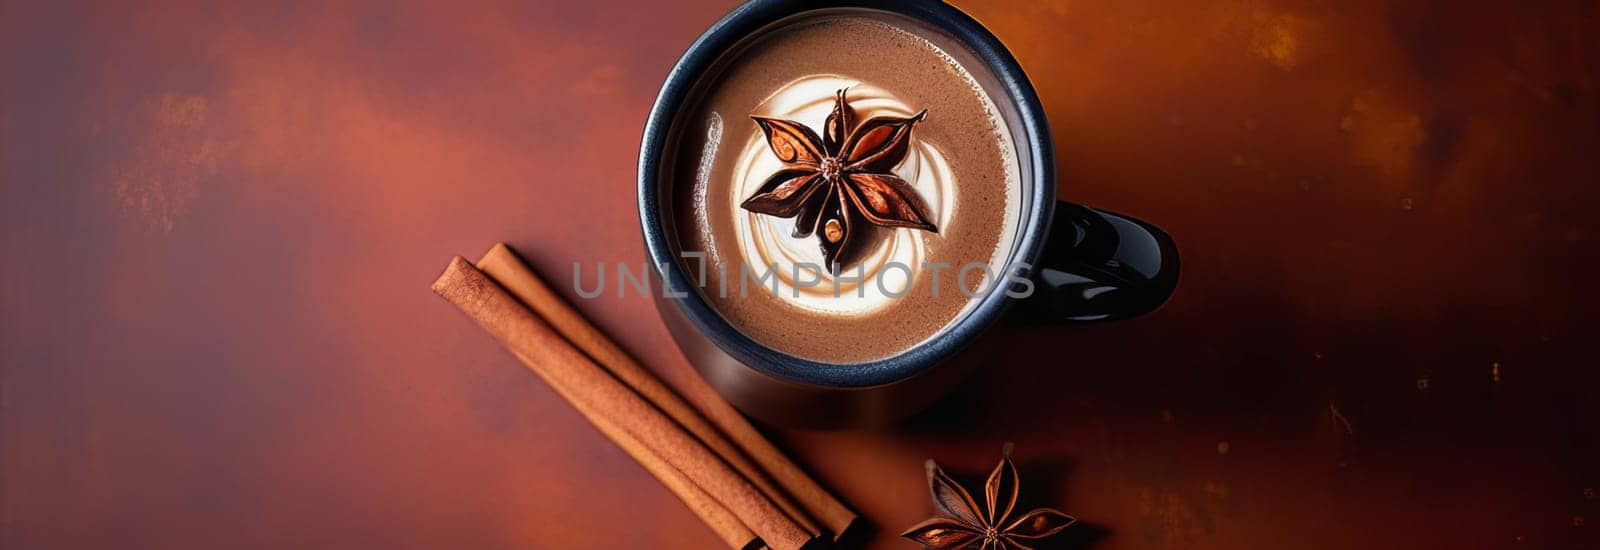 Rich and flavorful Champurrado beverage served in twin mugs, accented with cinnamon sticks and star anise, against a blank white canvas for text overlay